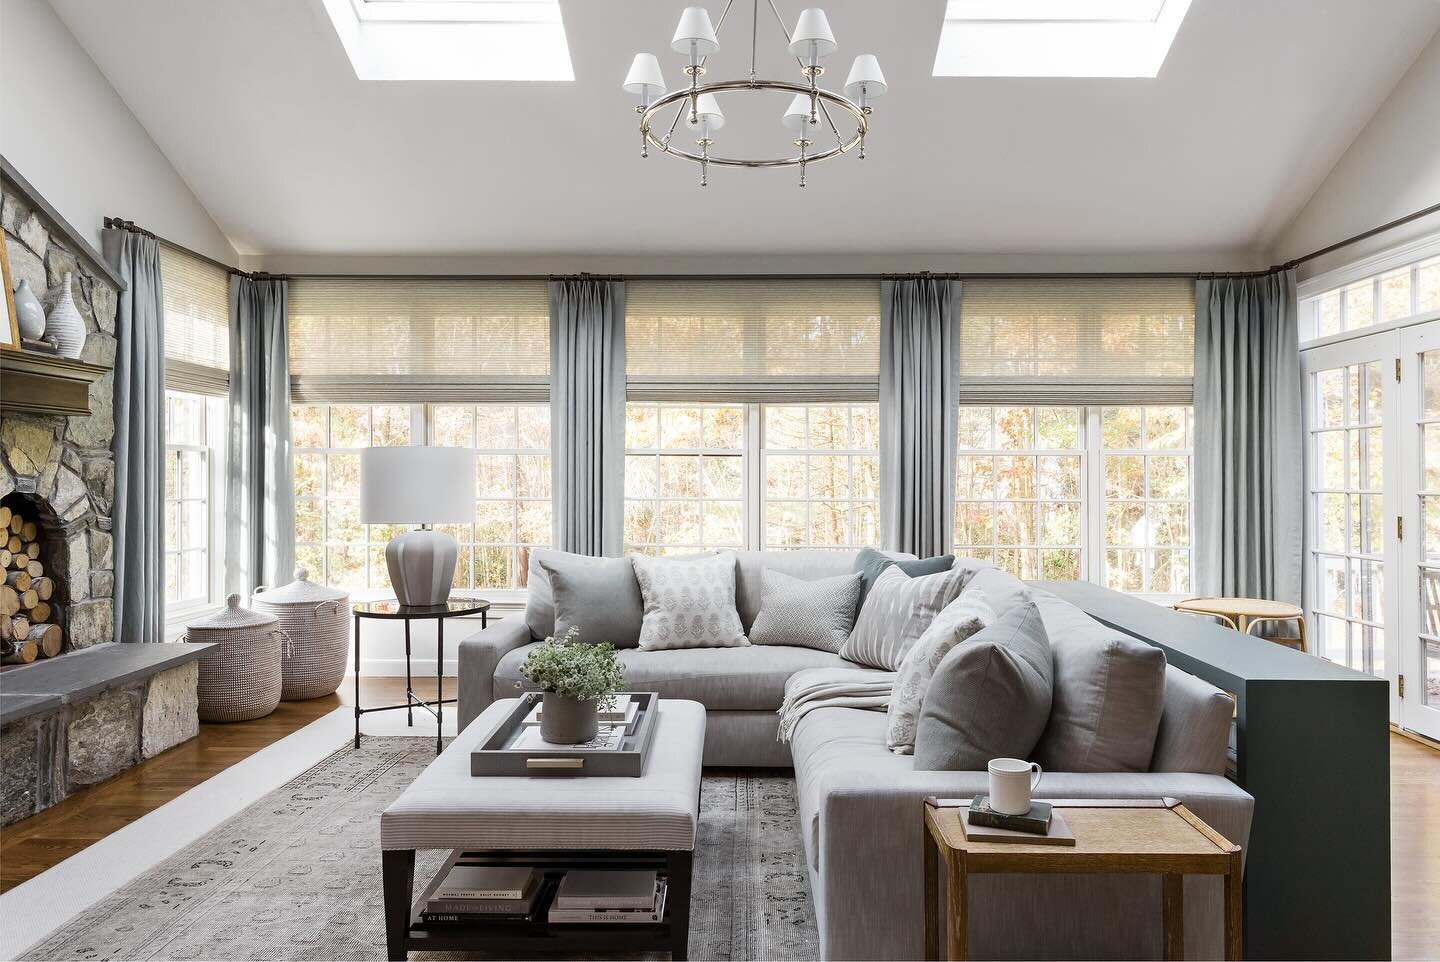 The most beautiful window treatments in this cozy family room thanks to Manny and the team at @makkasdrapery. Photo @joyellewest. #lindseyhansondesign